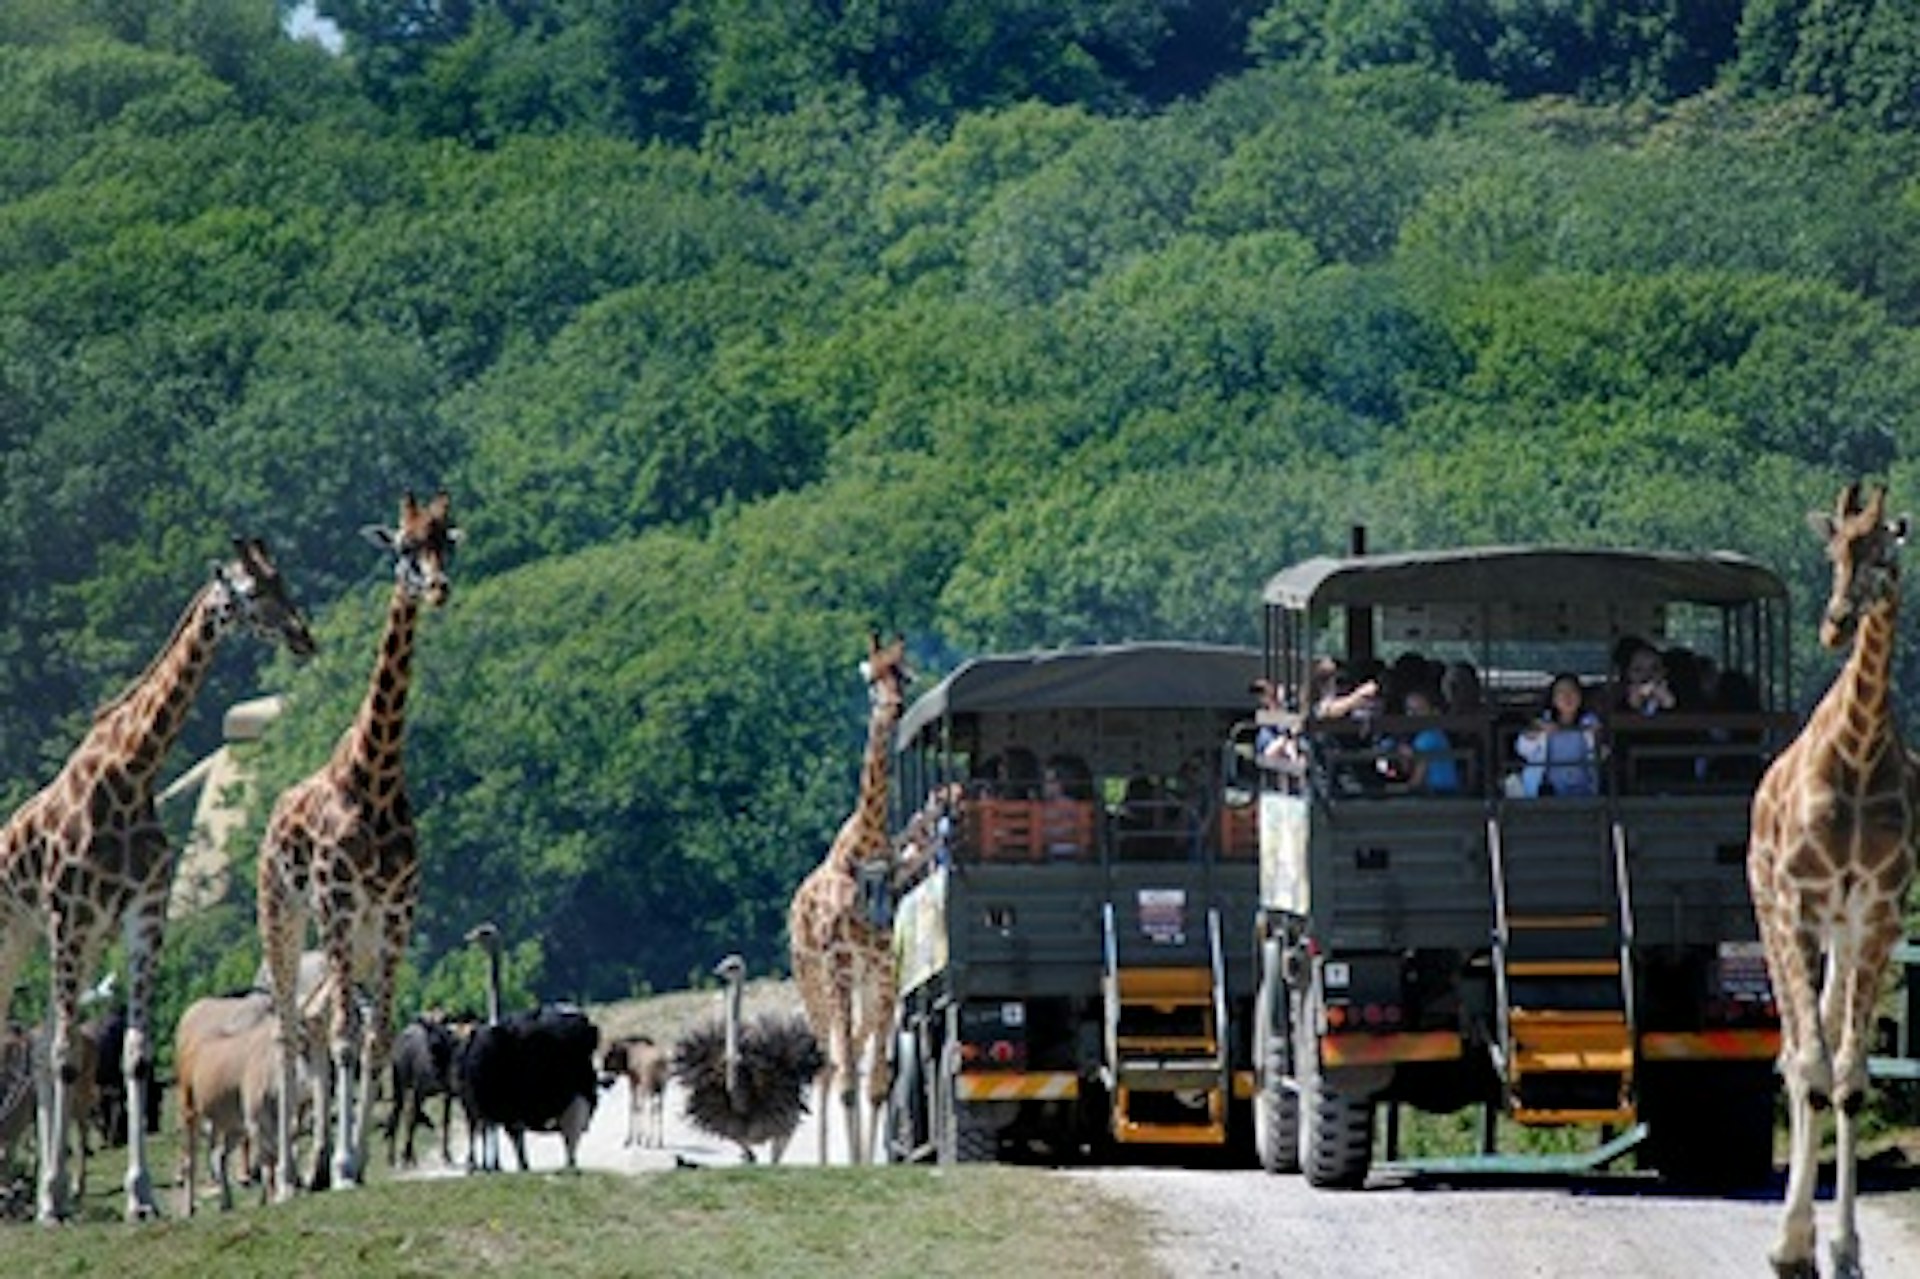 Visit to Port Lympne Reserve and Truck Safari for a Family of Four with Shared Animal Adoption